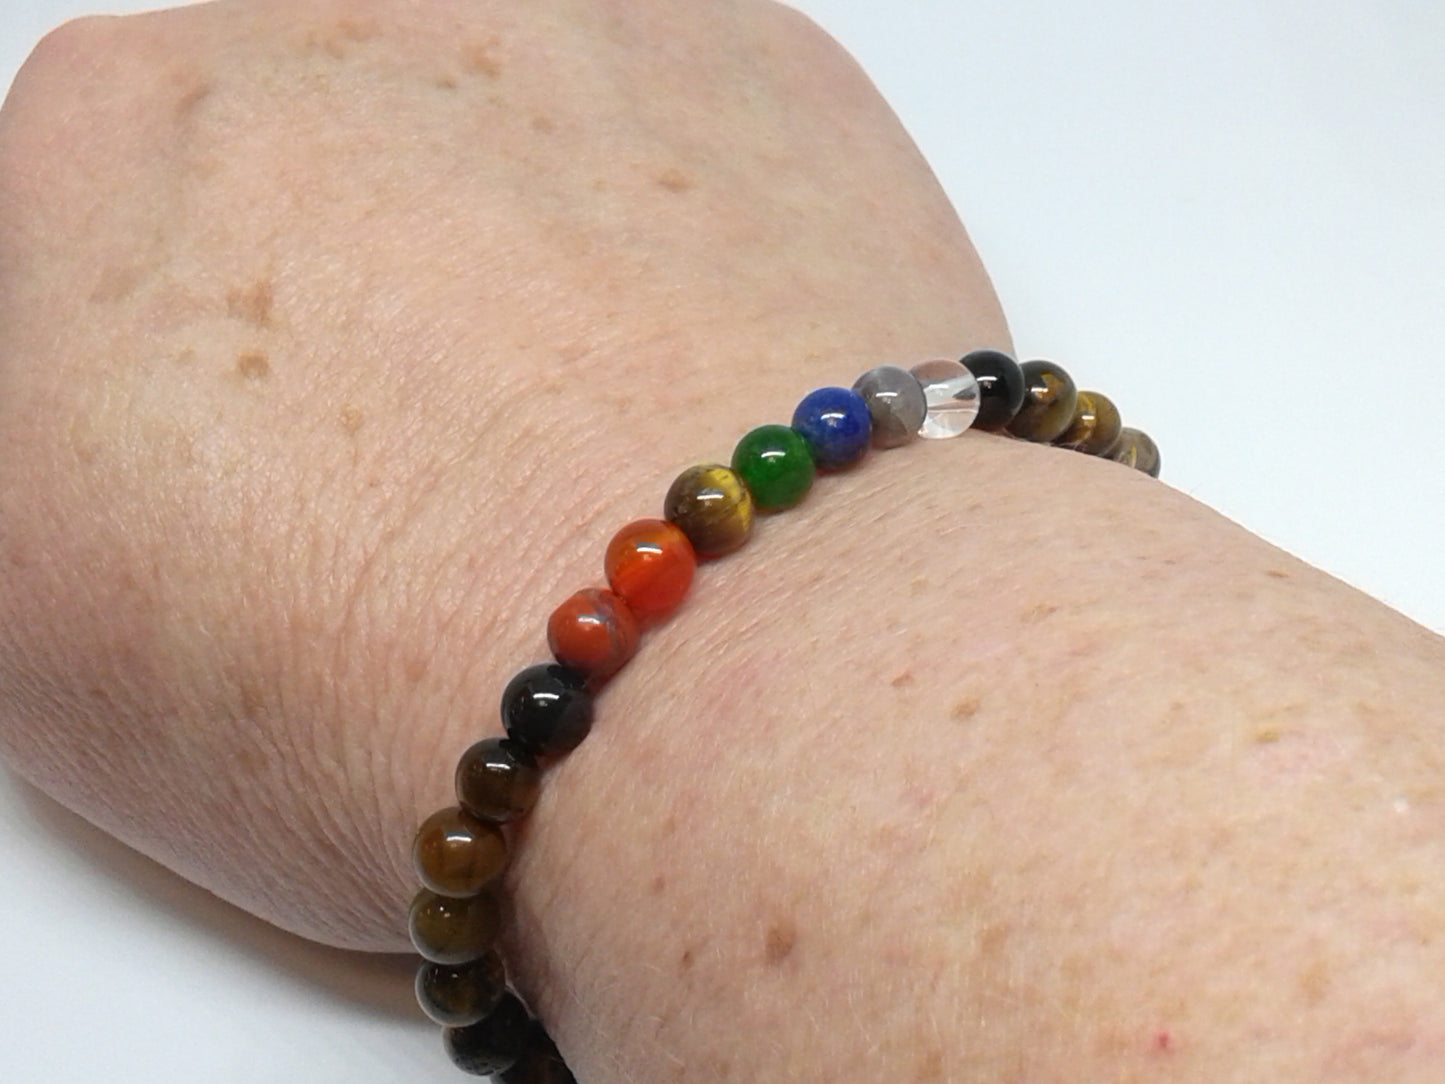 Chakra Bracelet - 1 sequence Surrounded by Golden Tiger Eye 6 mm beads